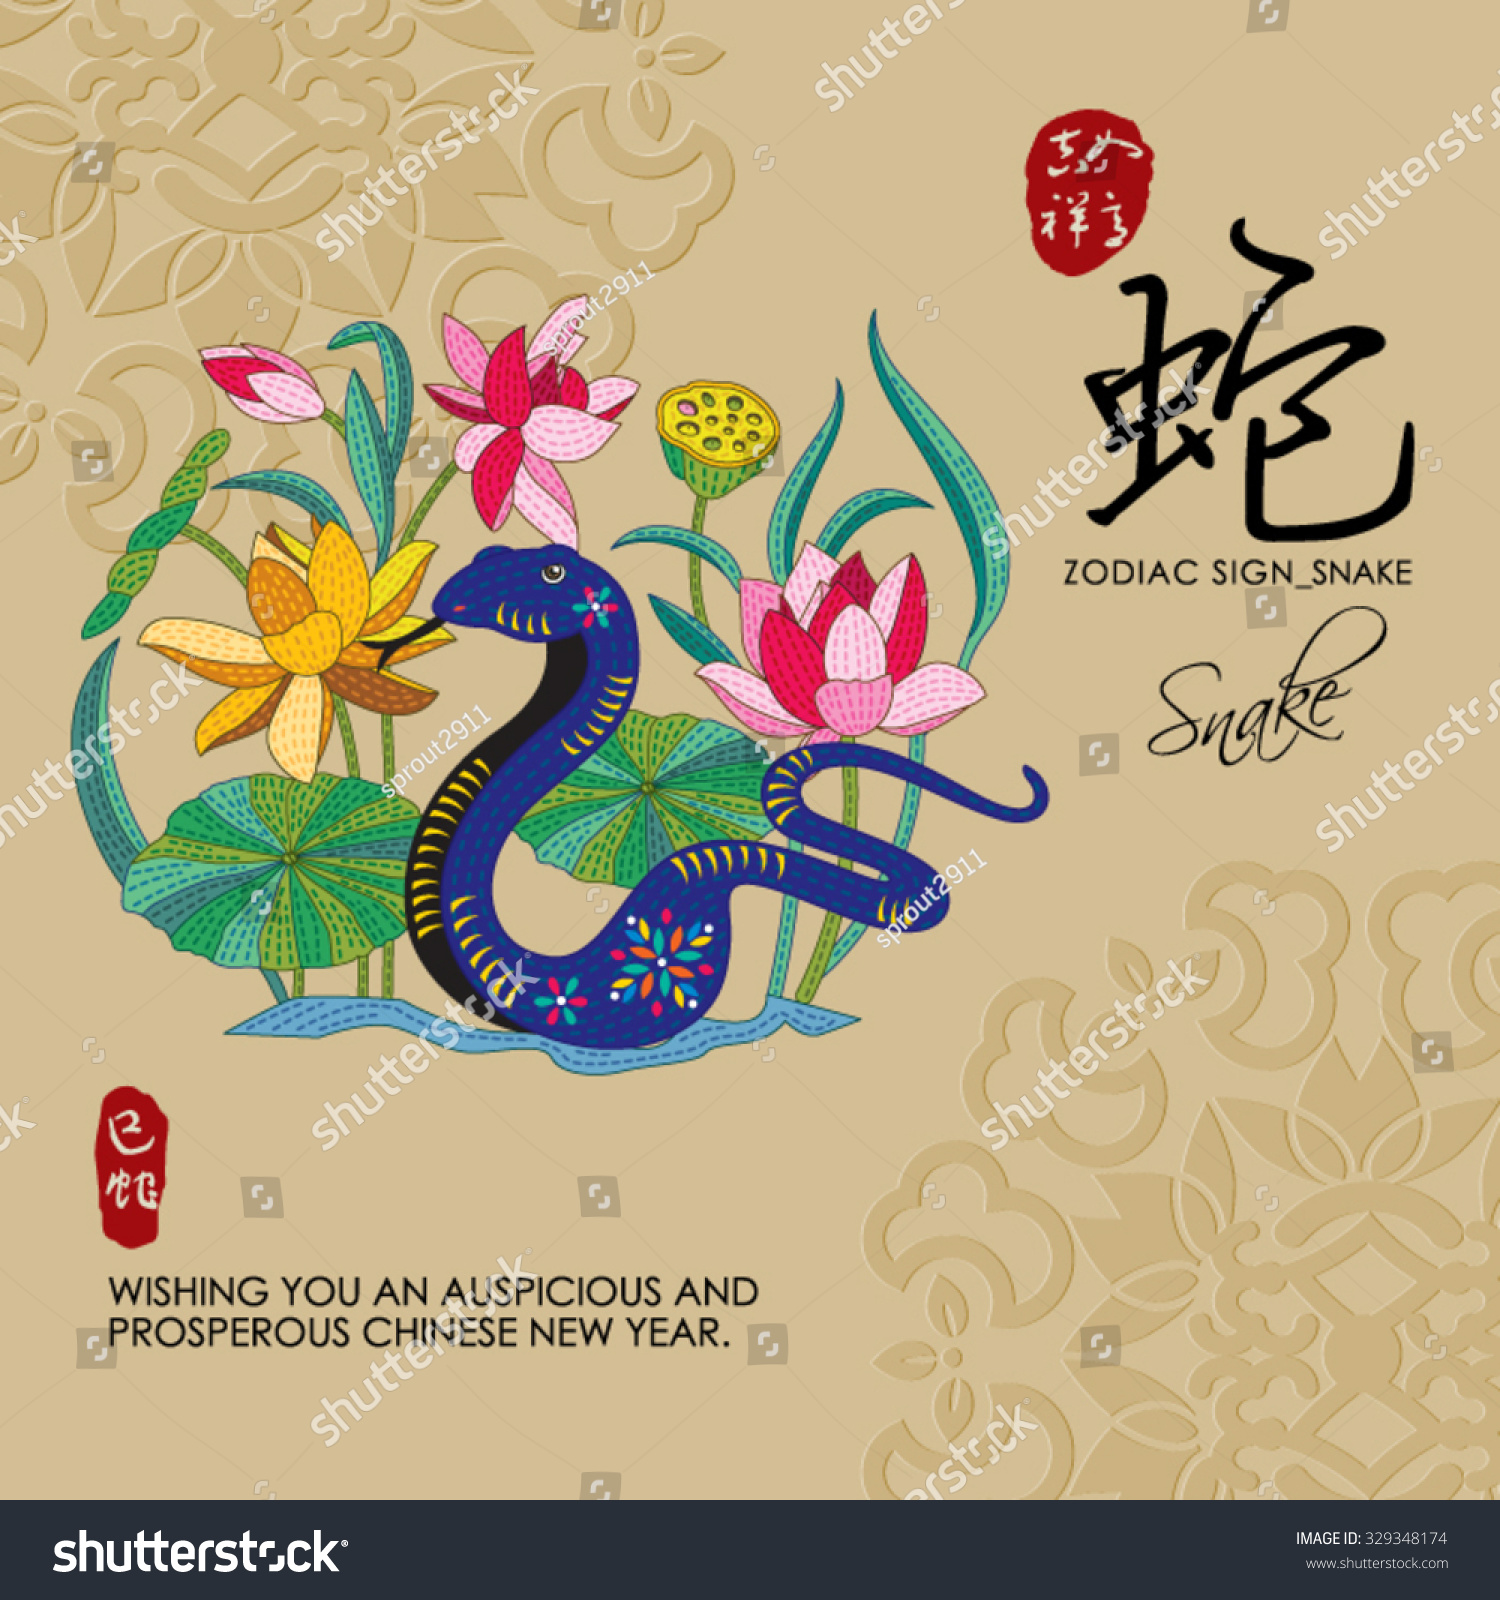 SVG of 12 Chinese Zodiac Signs of Snake with chinese calligraphy text and the translation. Auspicious Chinese Seal (top) Good luck and happiness to you and (bottom) Snake. svg